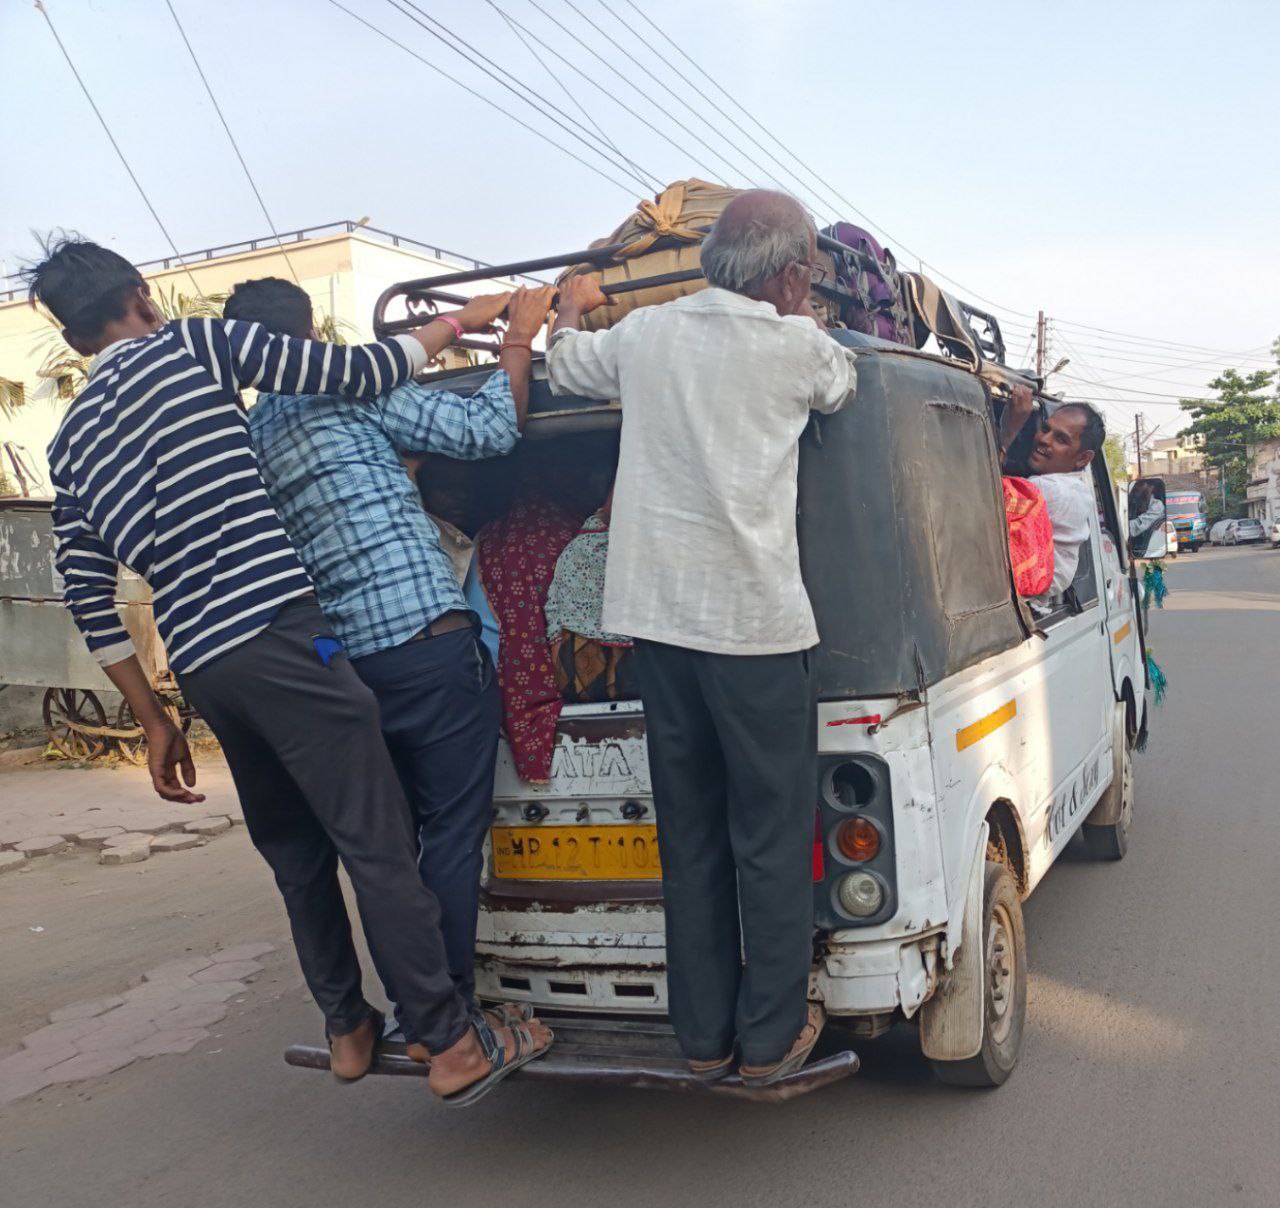 Passengers swing in overloaded vehicles putting lives at risk